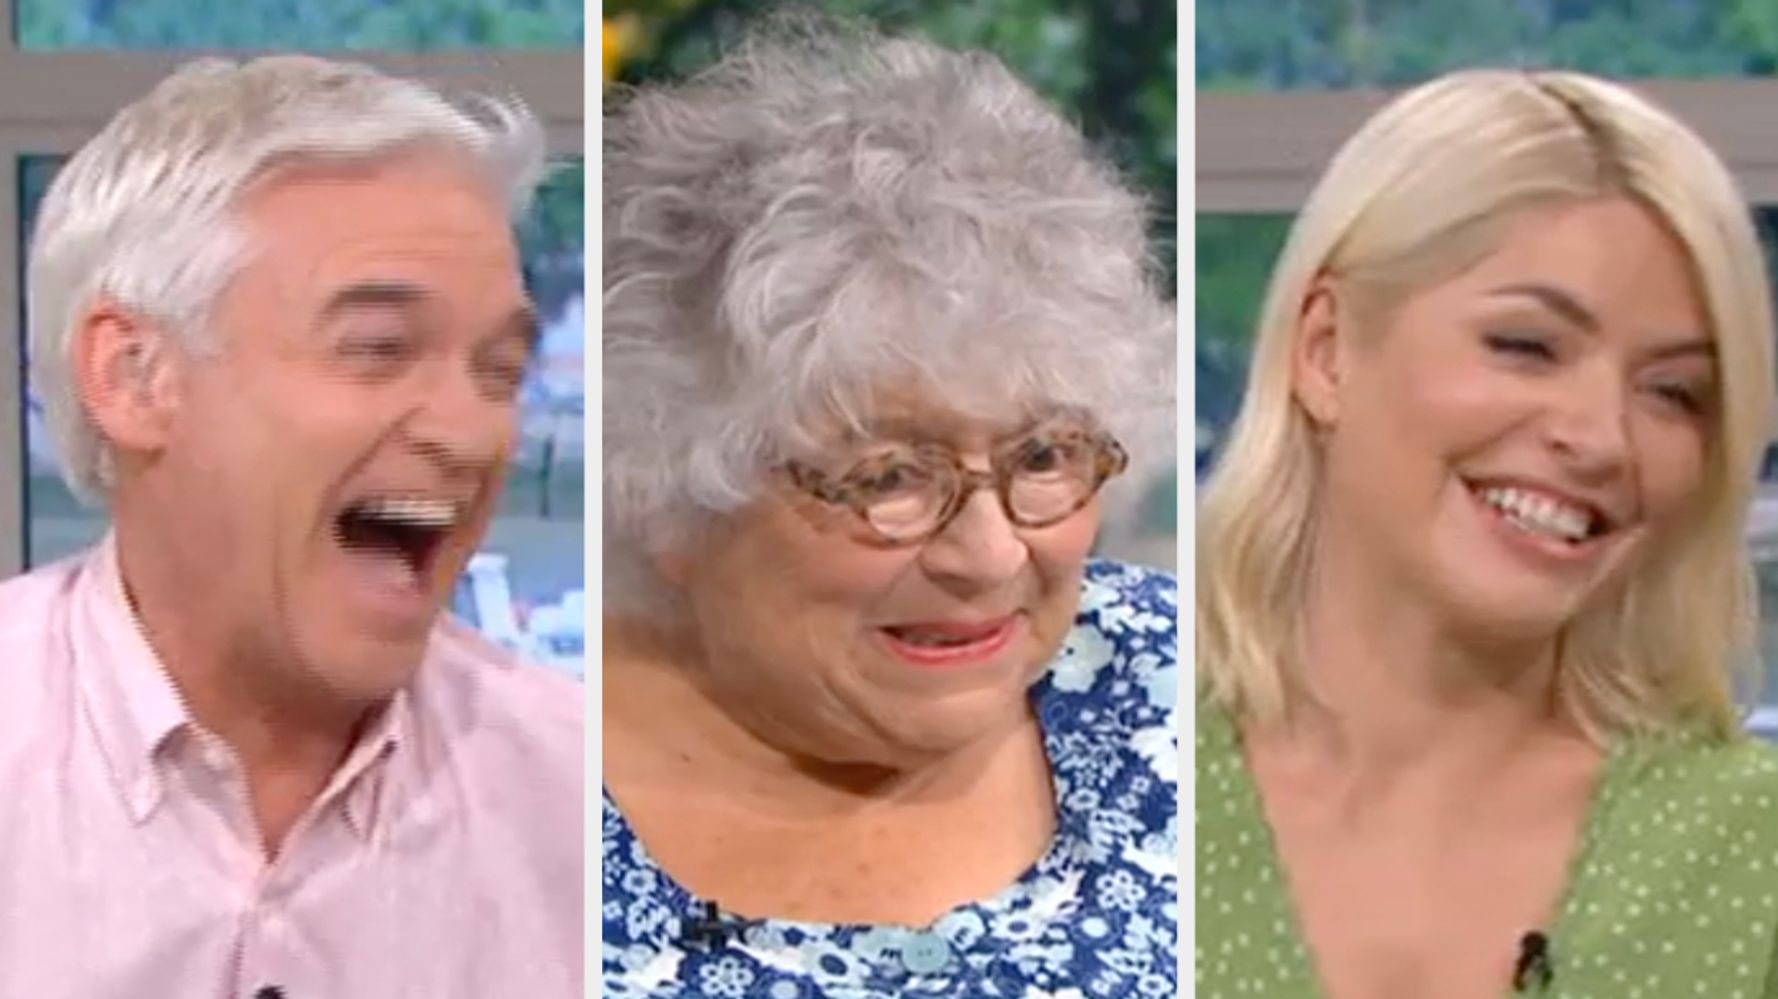 Miriam Margolyes Promised To Be Well Behaved On This Morning. Things Didn't Turn Out That Way.